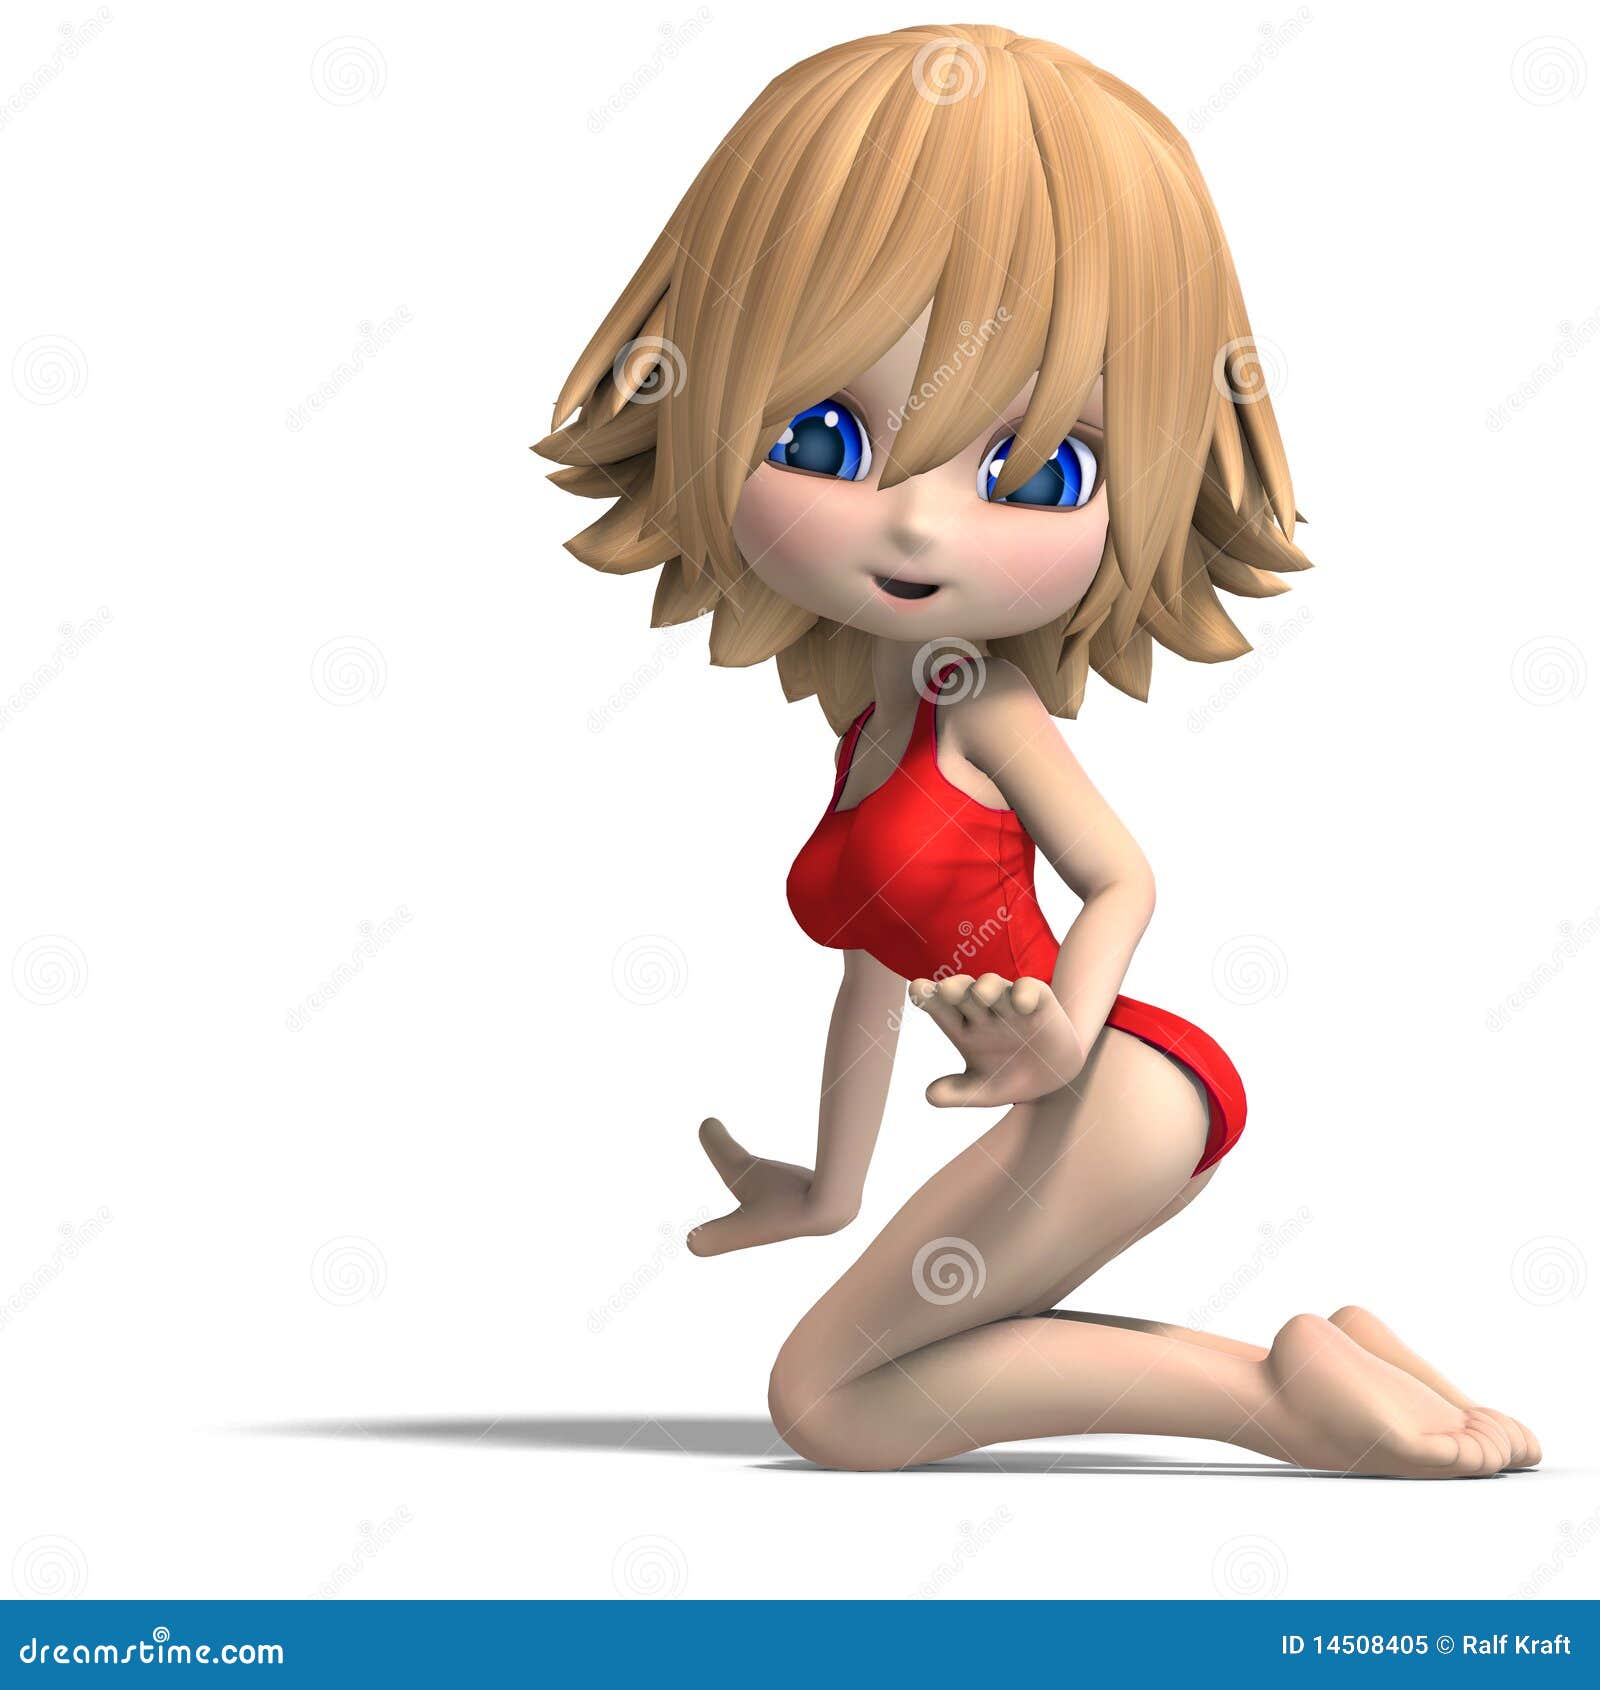 Beautiful Cartoon Girl in a Onepiece Swimsuit. 3D Stock Illustration